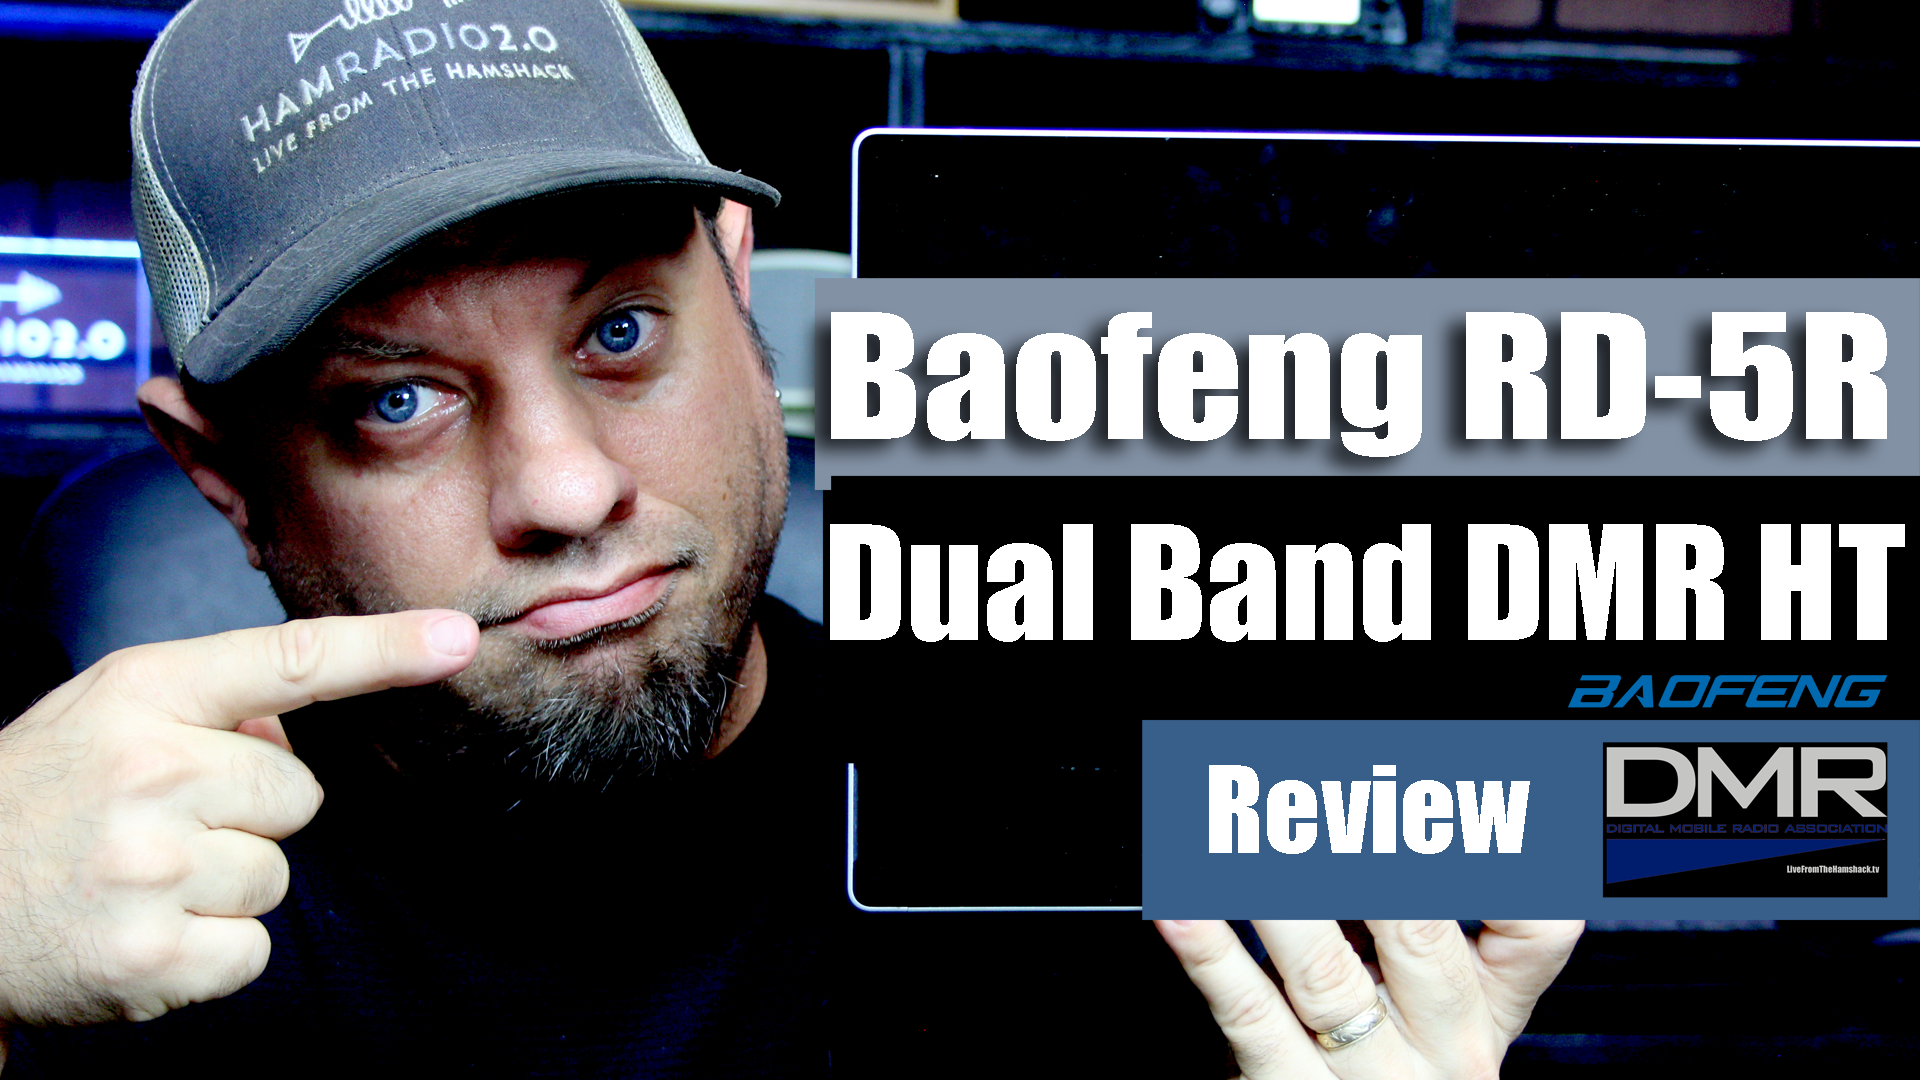 Episode 149: Baofeng RD-5R Dual Band DMR Review